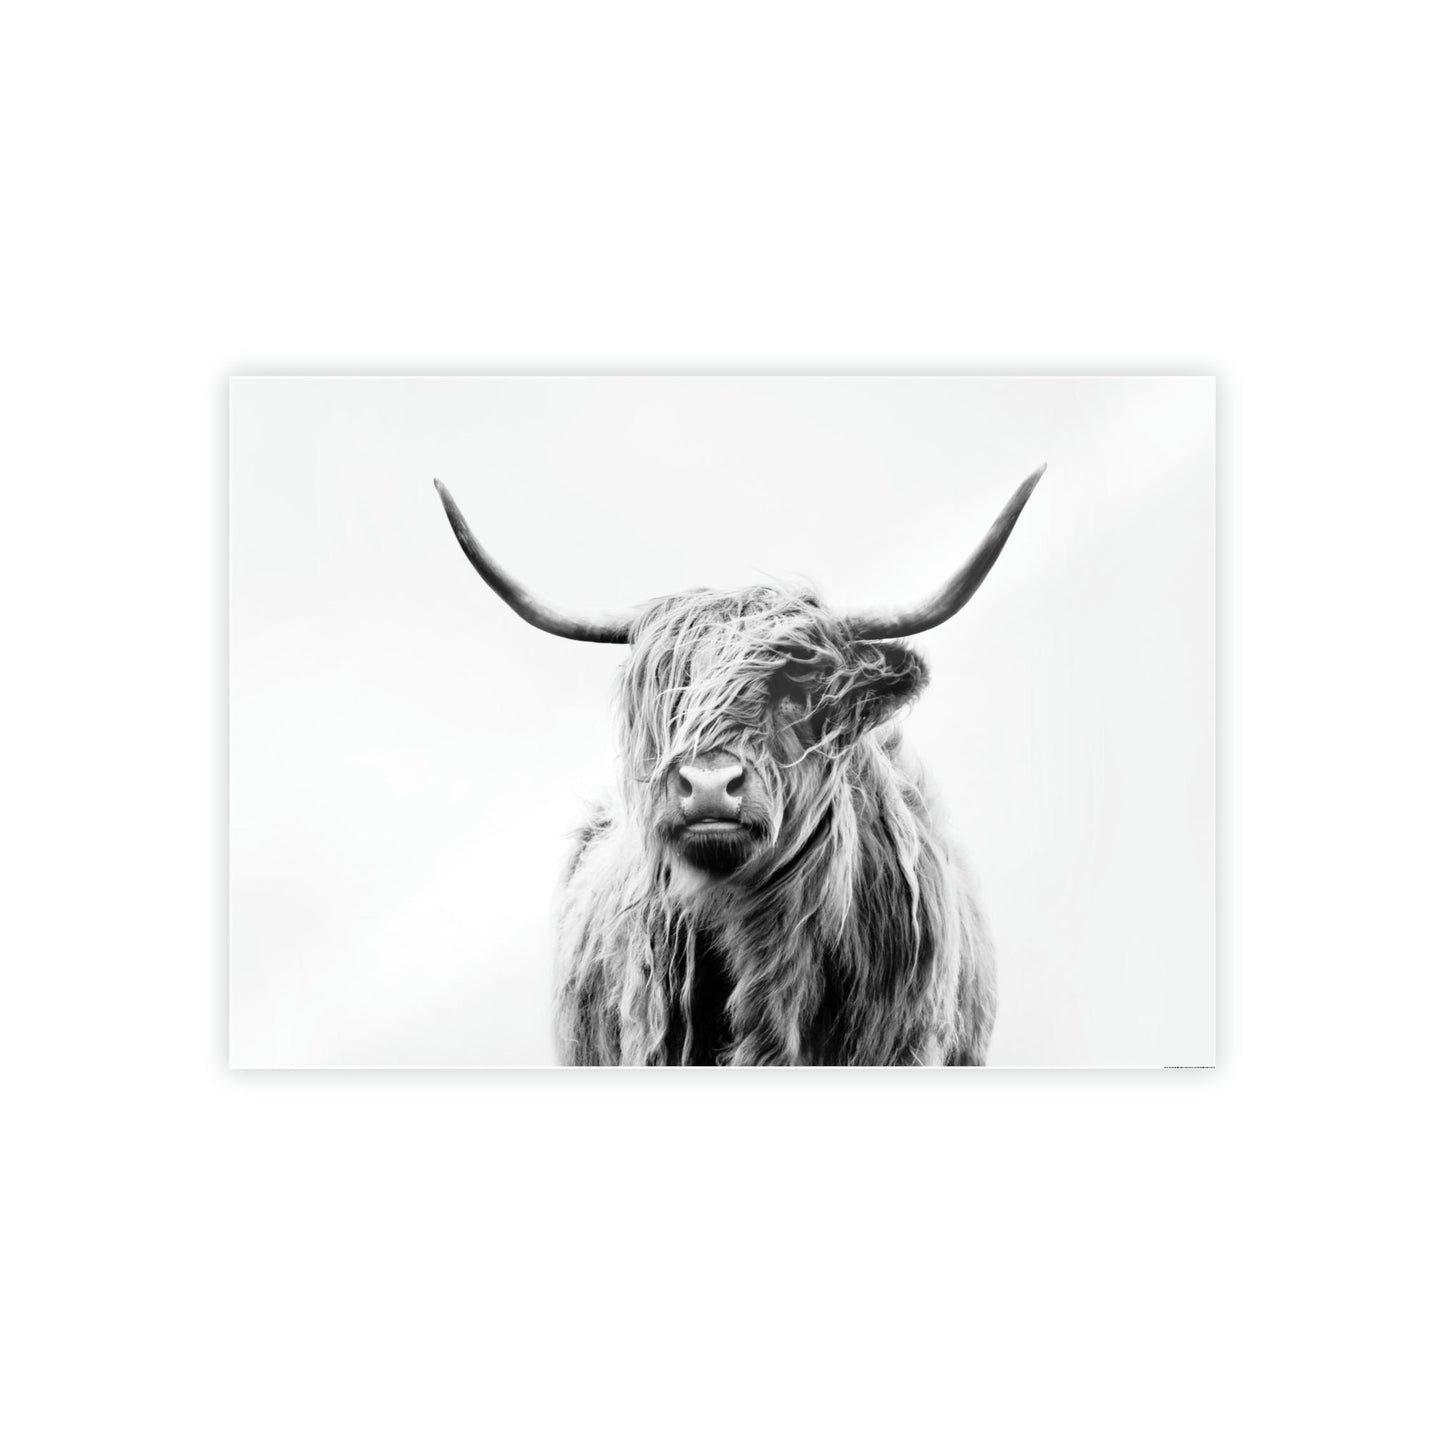 Nature's Majesty: Cow Art for a Breathtaking Wall Art Statement